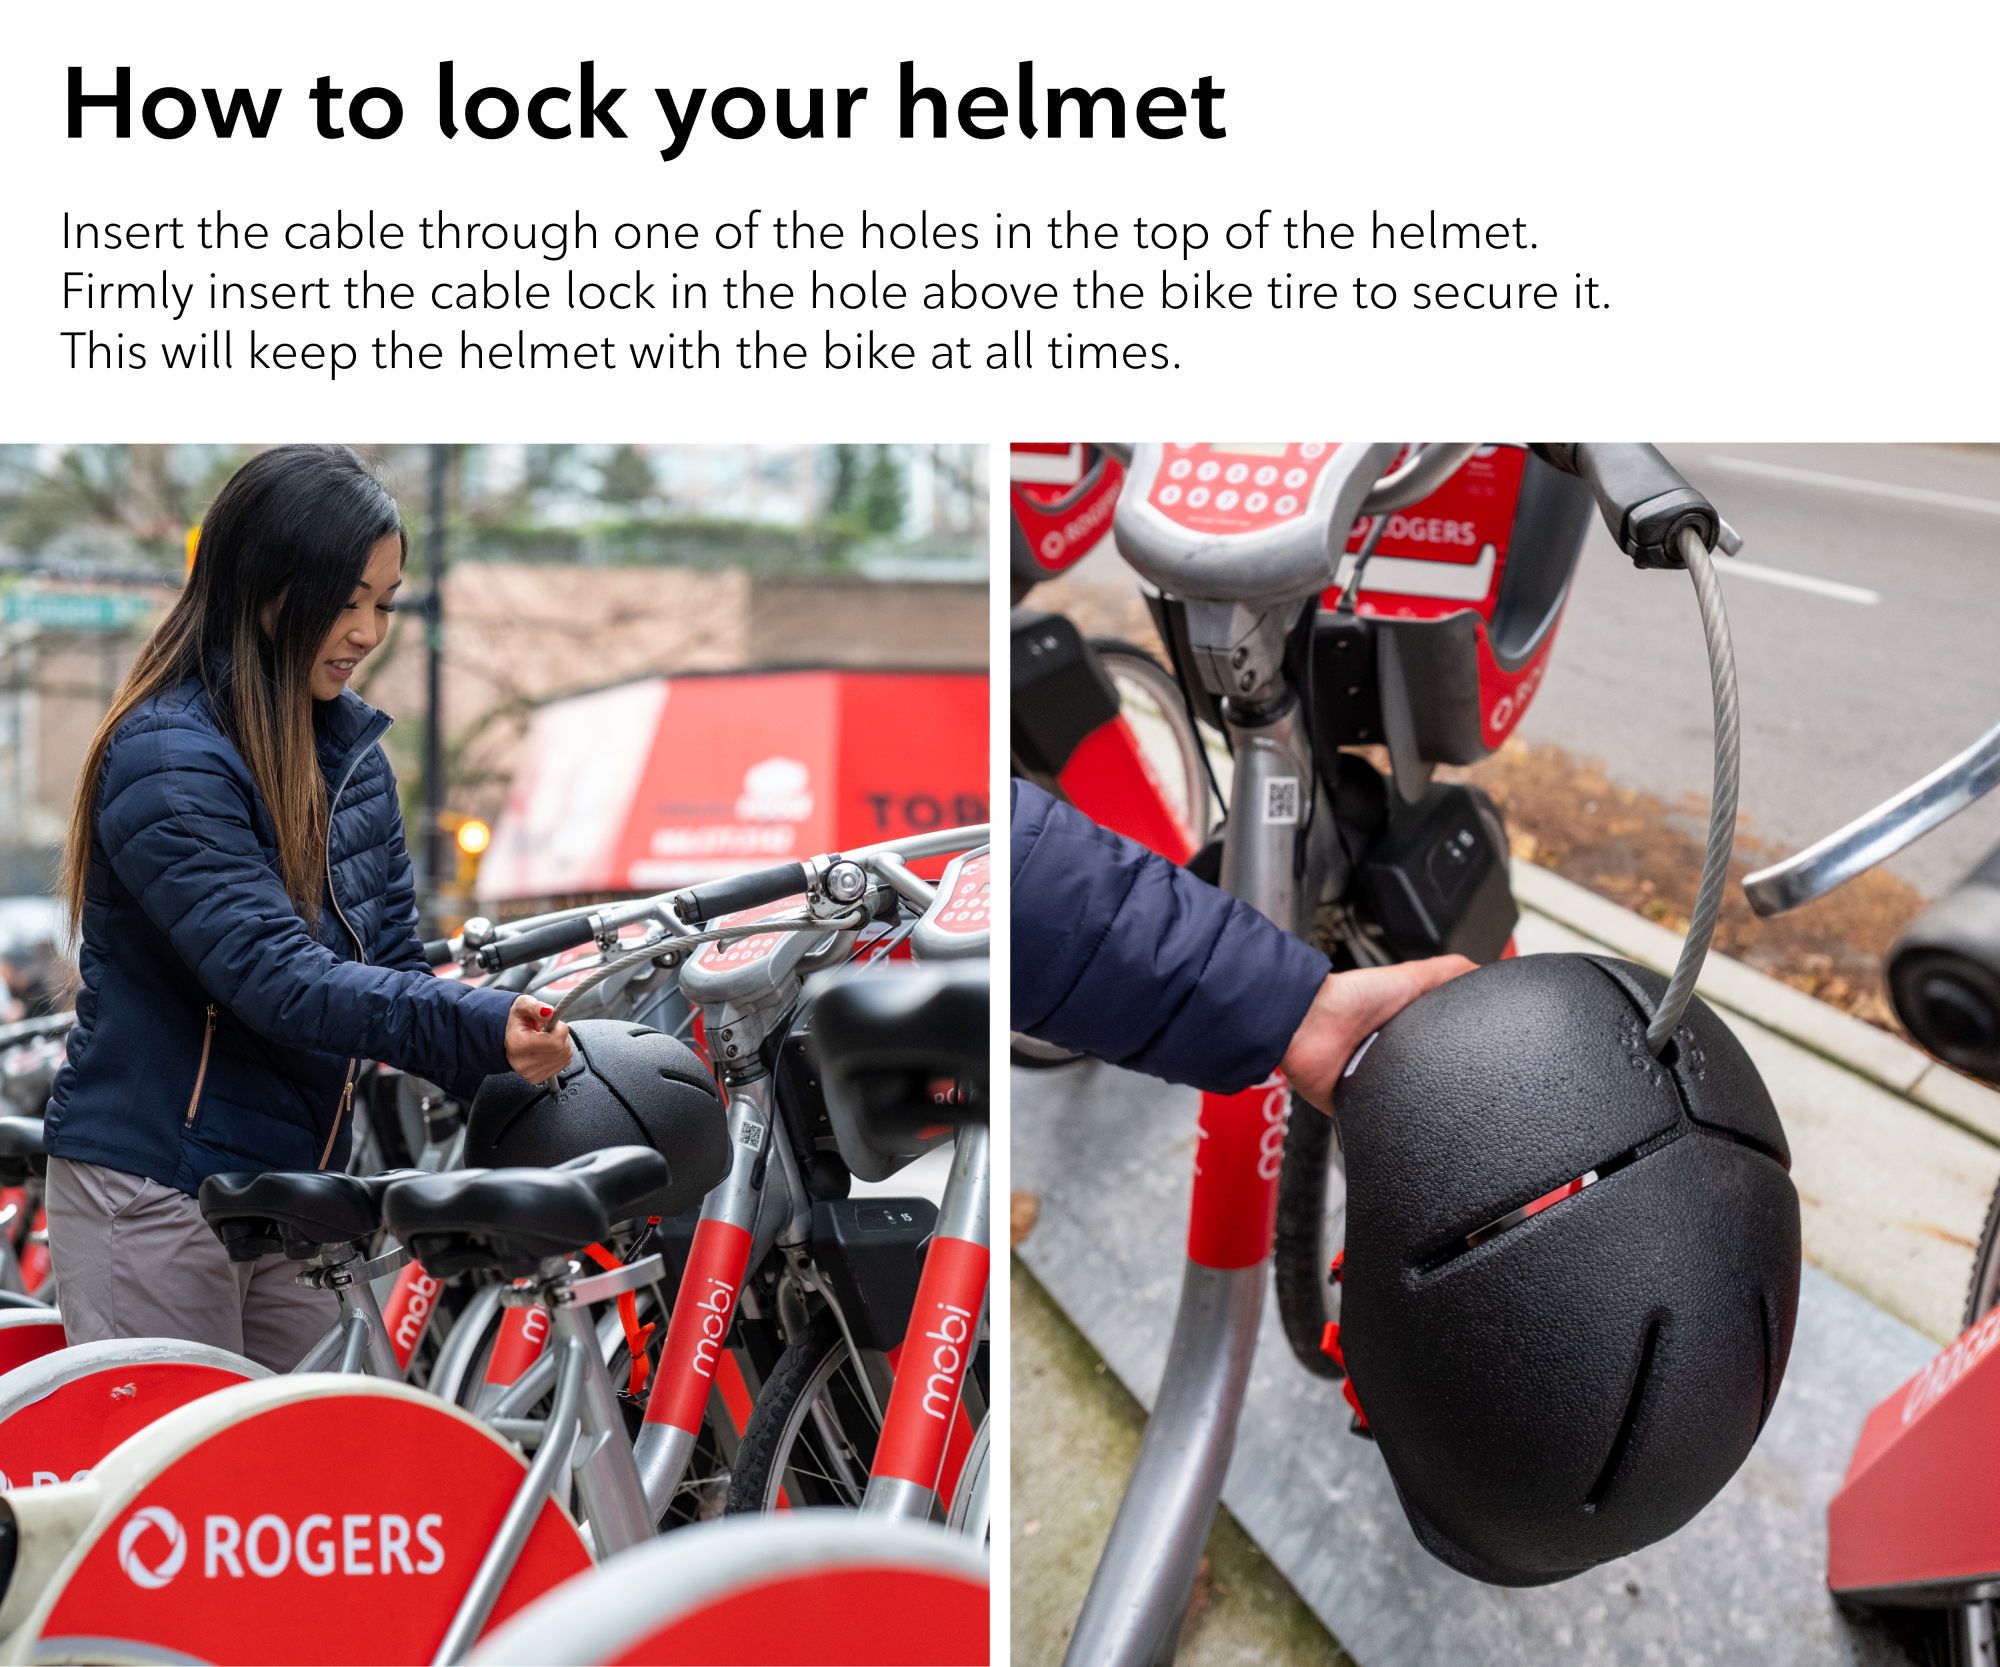 To lock helmet: insert the lock cable through one of the holes in the top of the helmet. This will keep the helmet with the bike at all times.